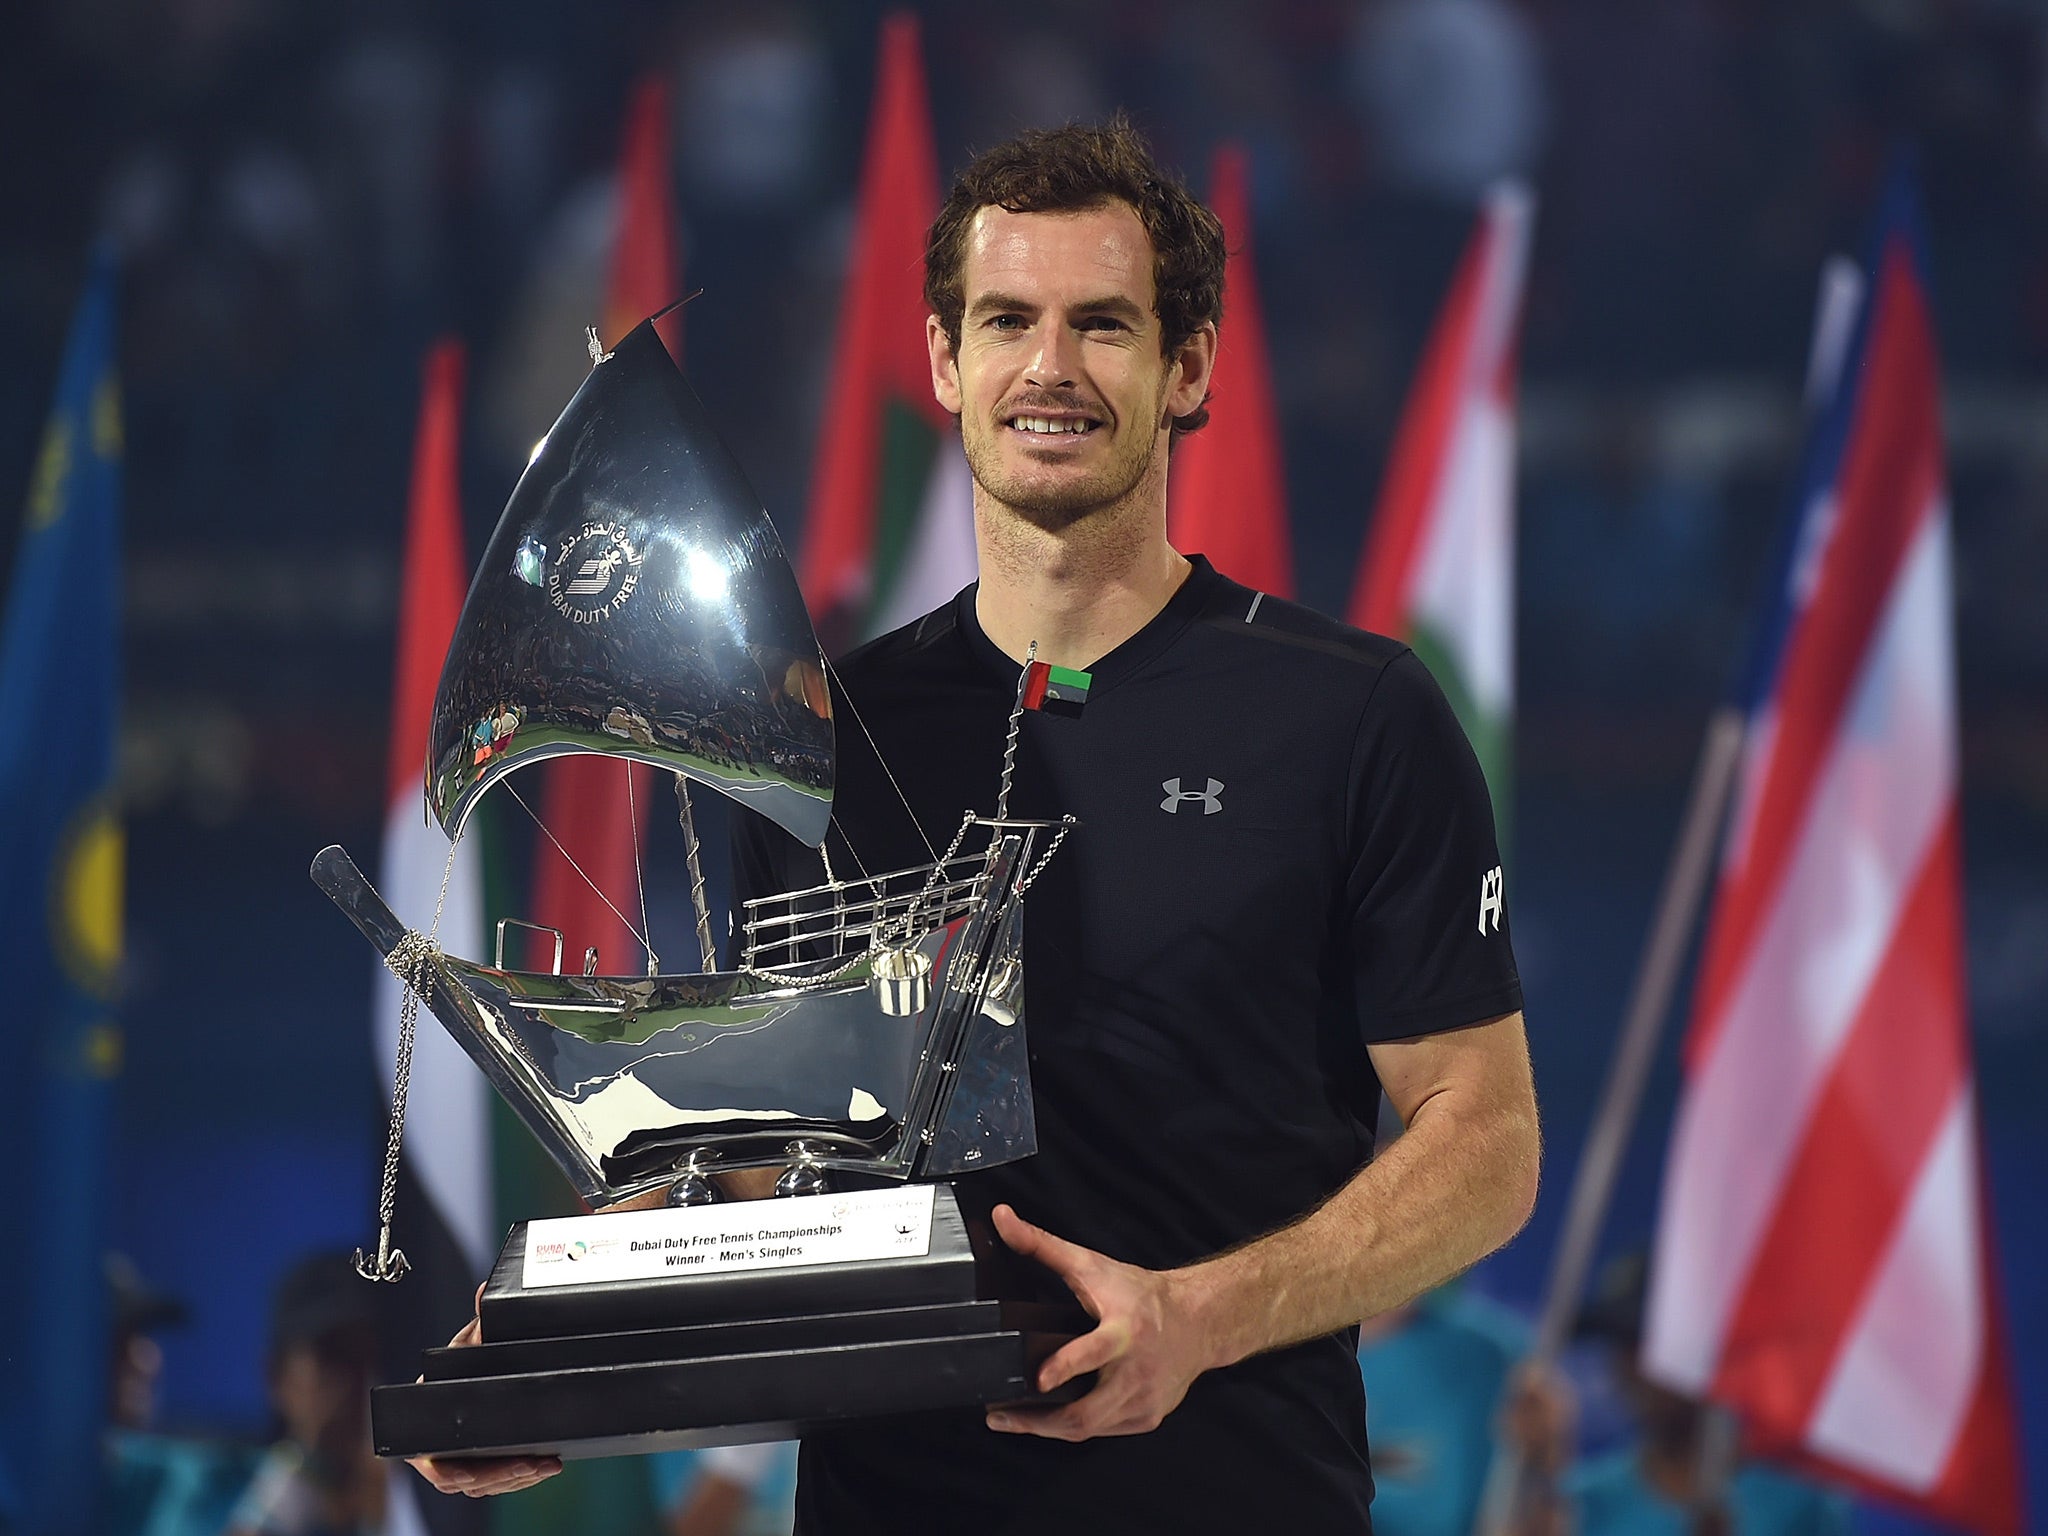 Andy Murray recovered from being broken twice early on